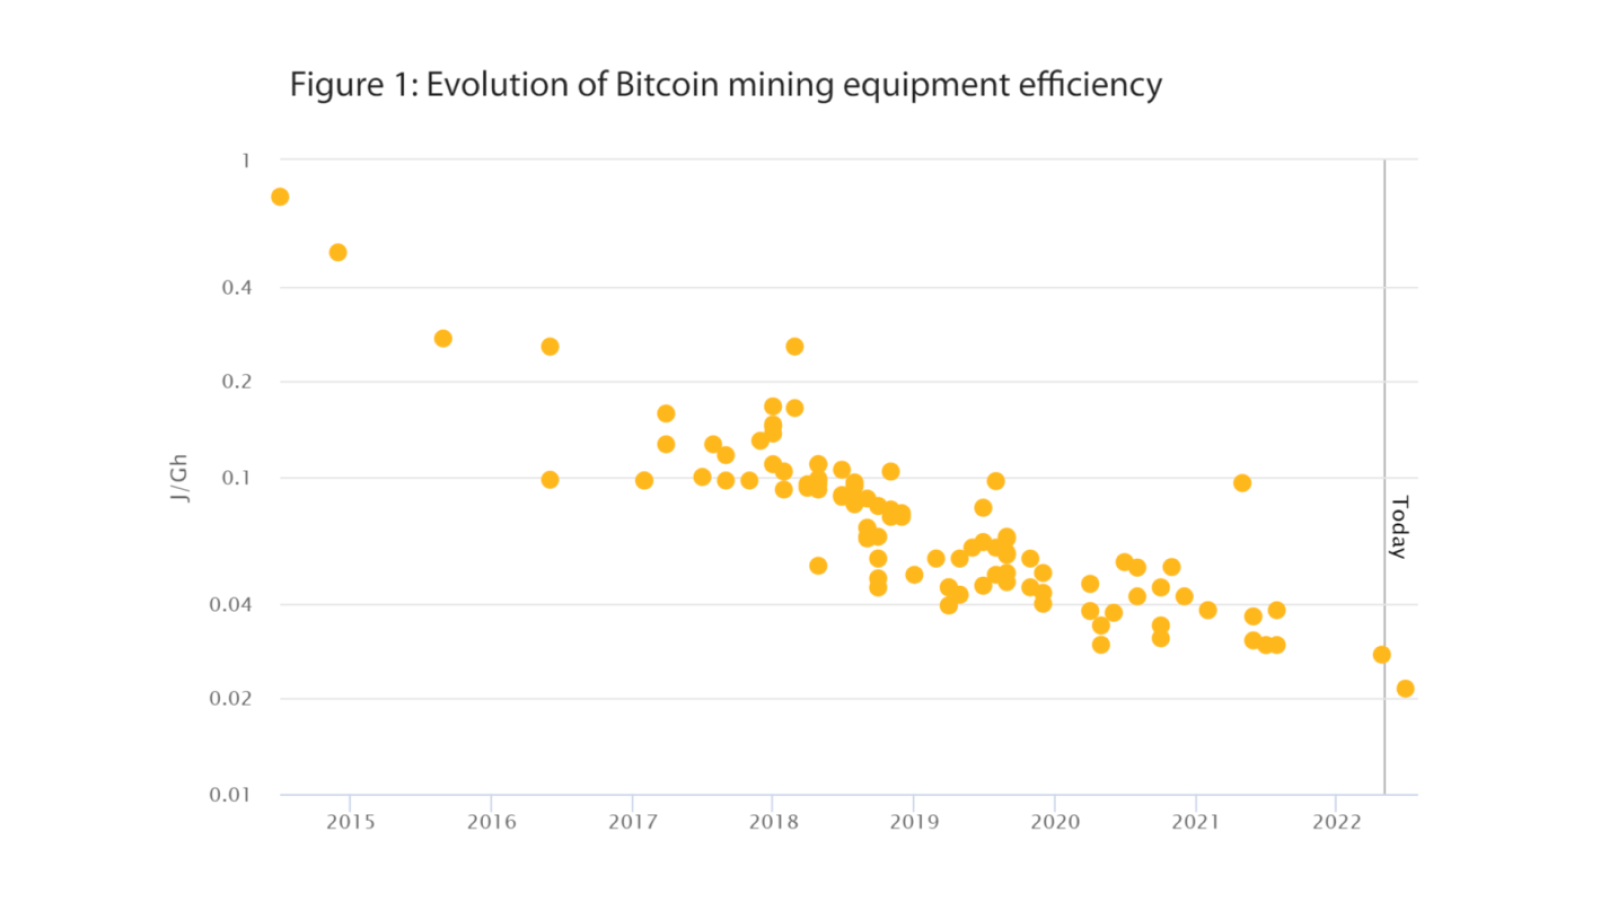 State_of_Network_Evolution_of_Bitcoin_mining_equipment_efficiency.png